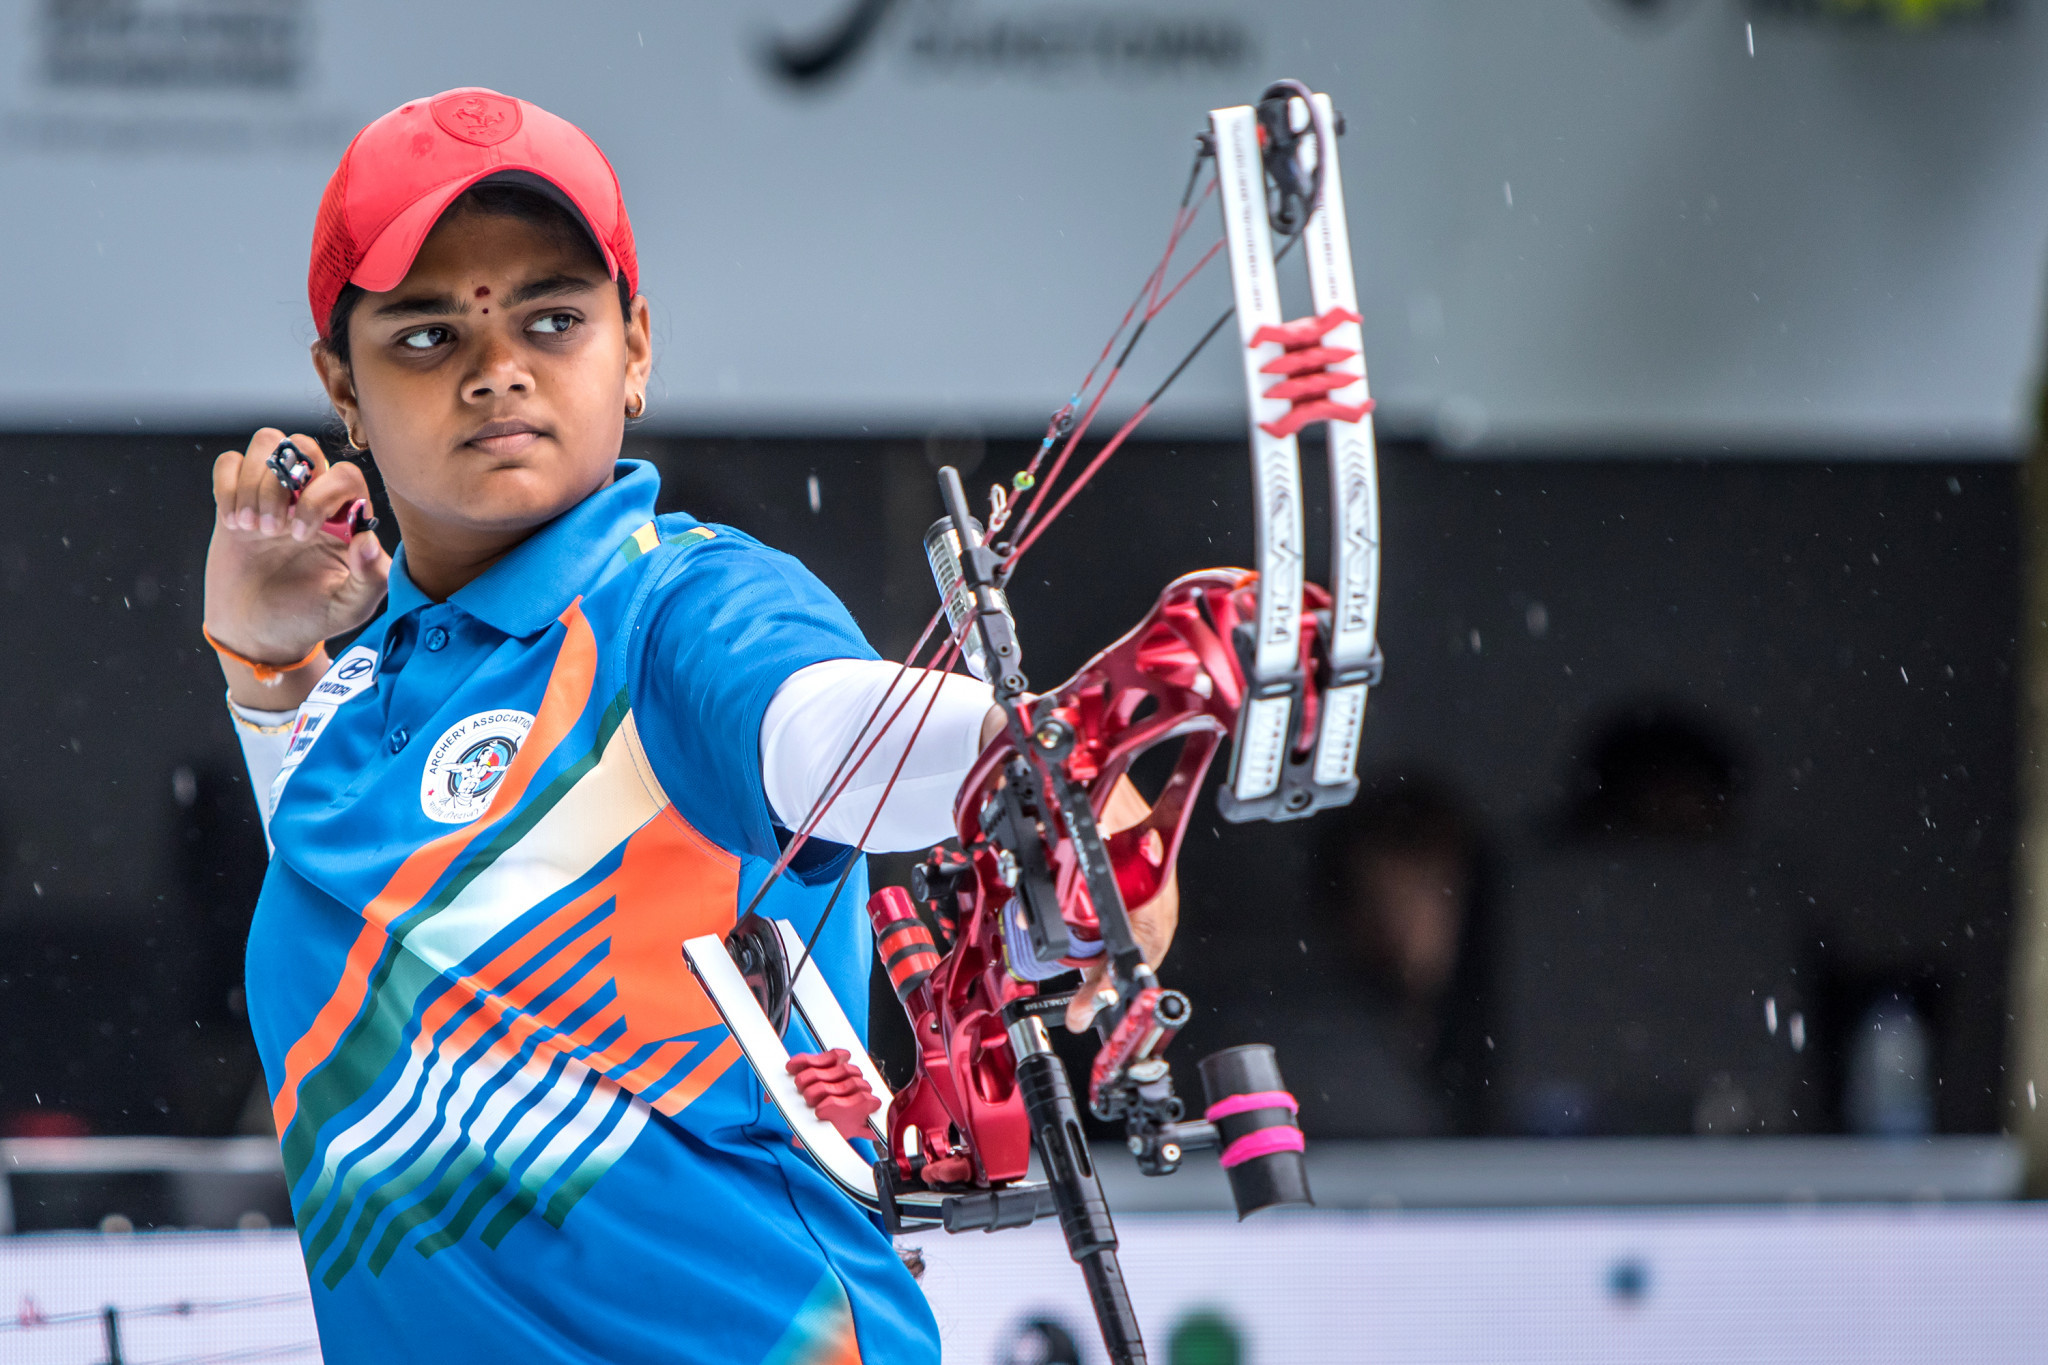 A Commonwealth Archery and Shooting Championships is due to take place in Chandigarh in January 2022 six months before Birmingham 2022 with medals of the two events added together afterwards ©Getty Images